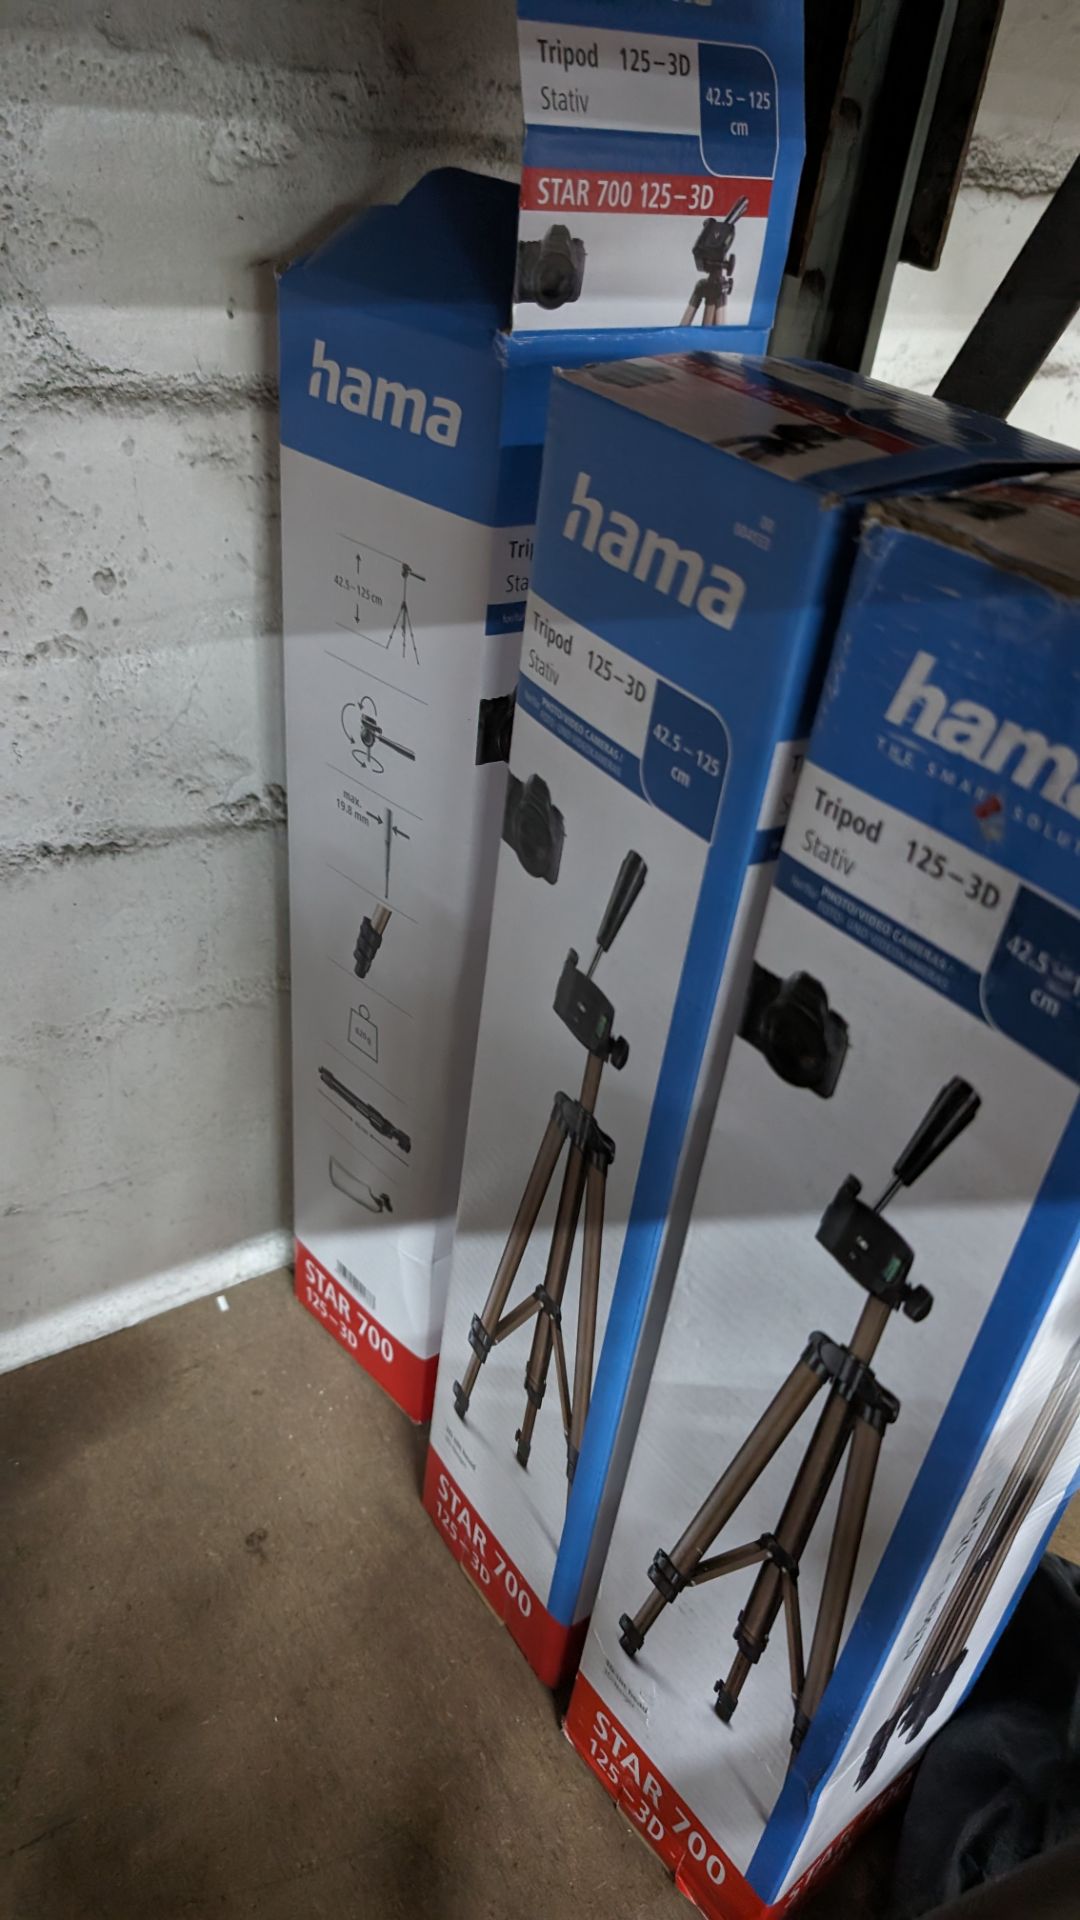 4 off Hama Star 700 tripods, 125-3D, 42.5-125cm - Image 5 of 6